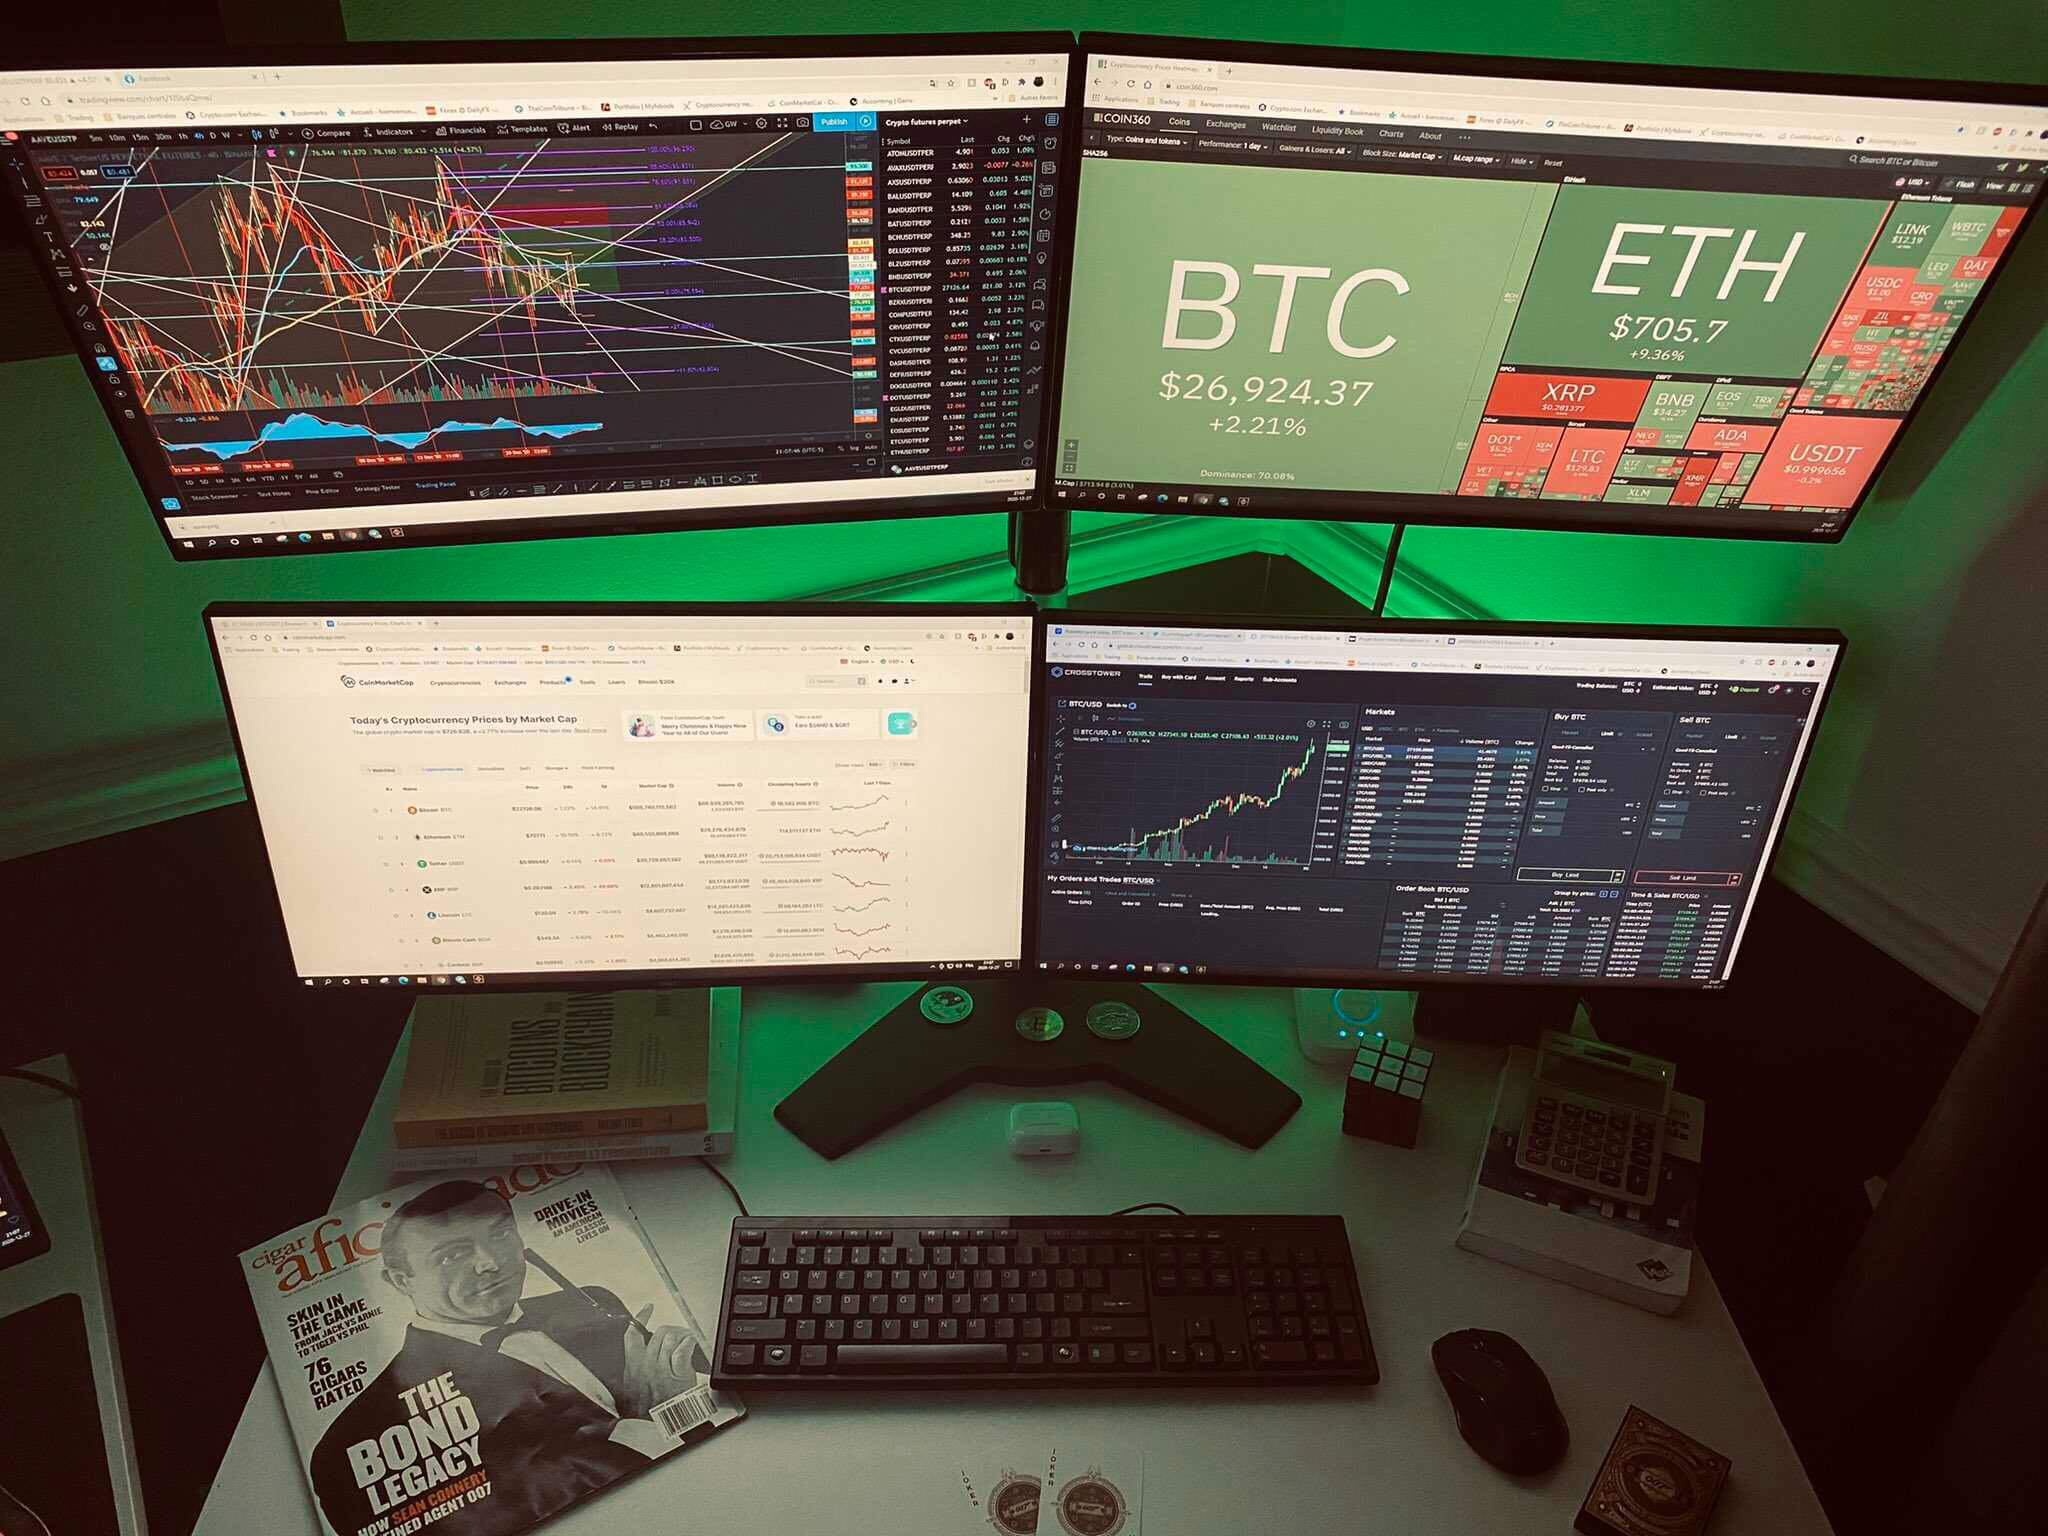 Your Trading Battlestation Could Win You $5,000 in BTC